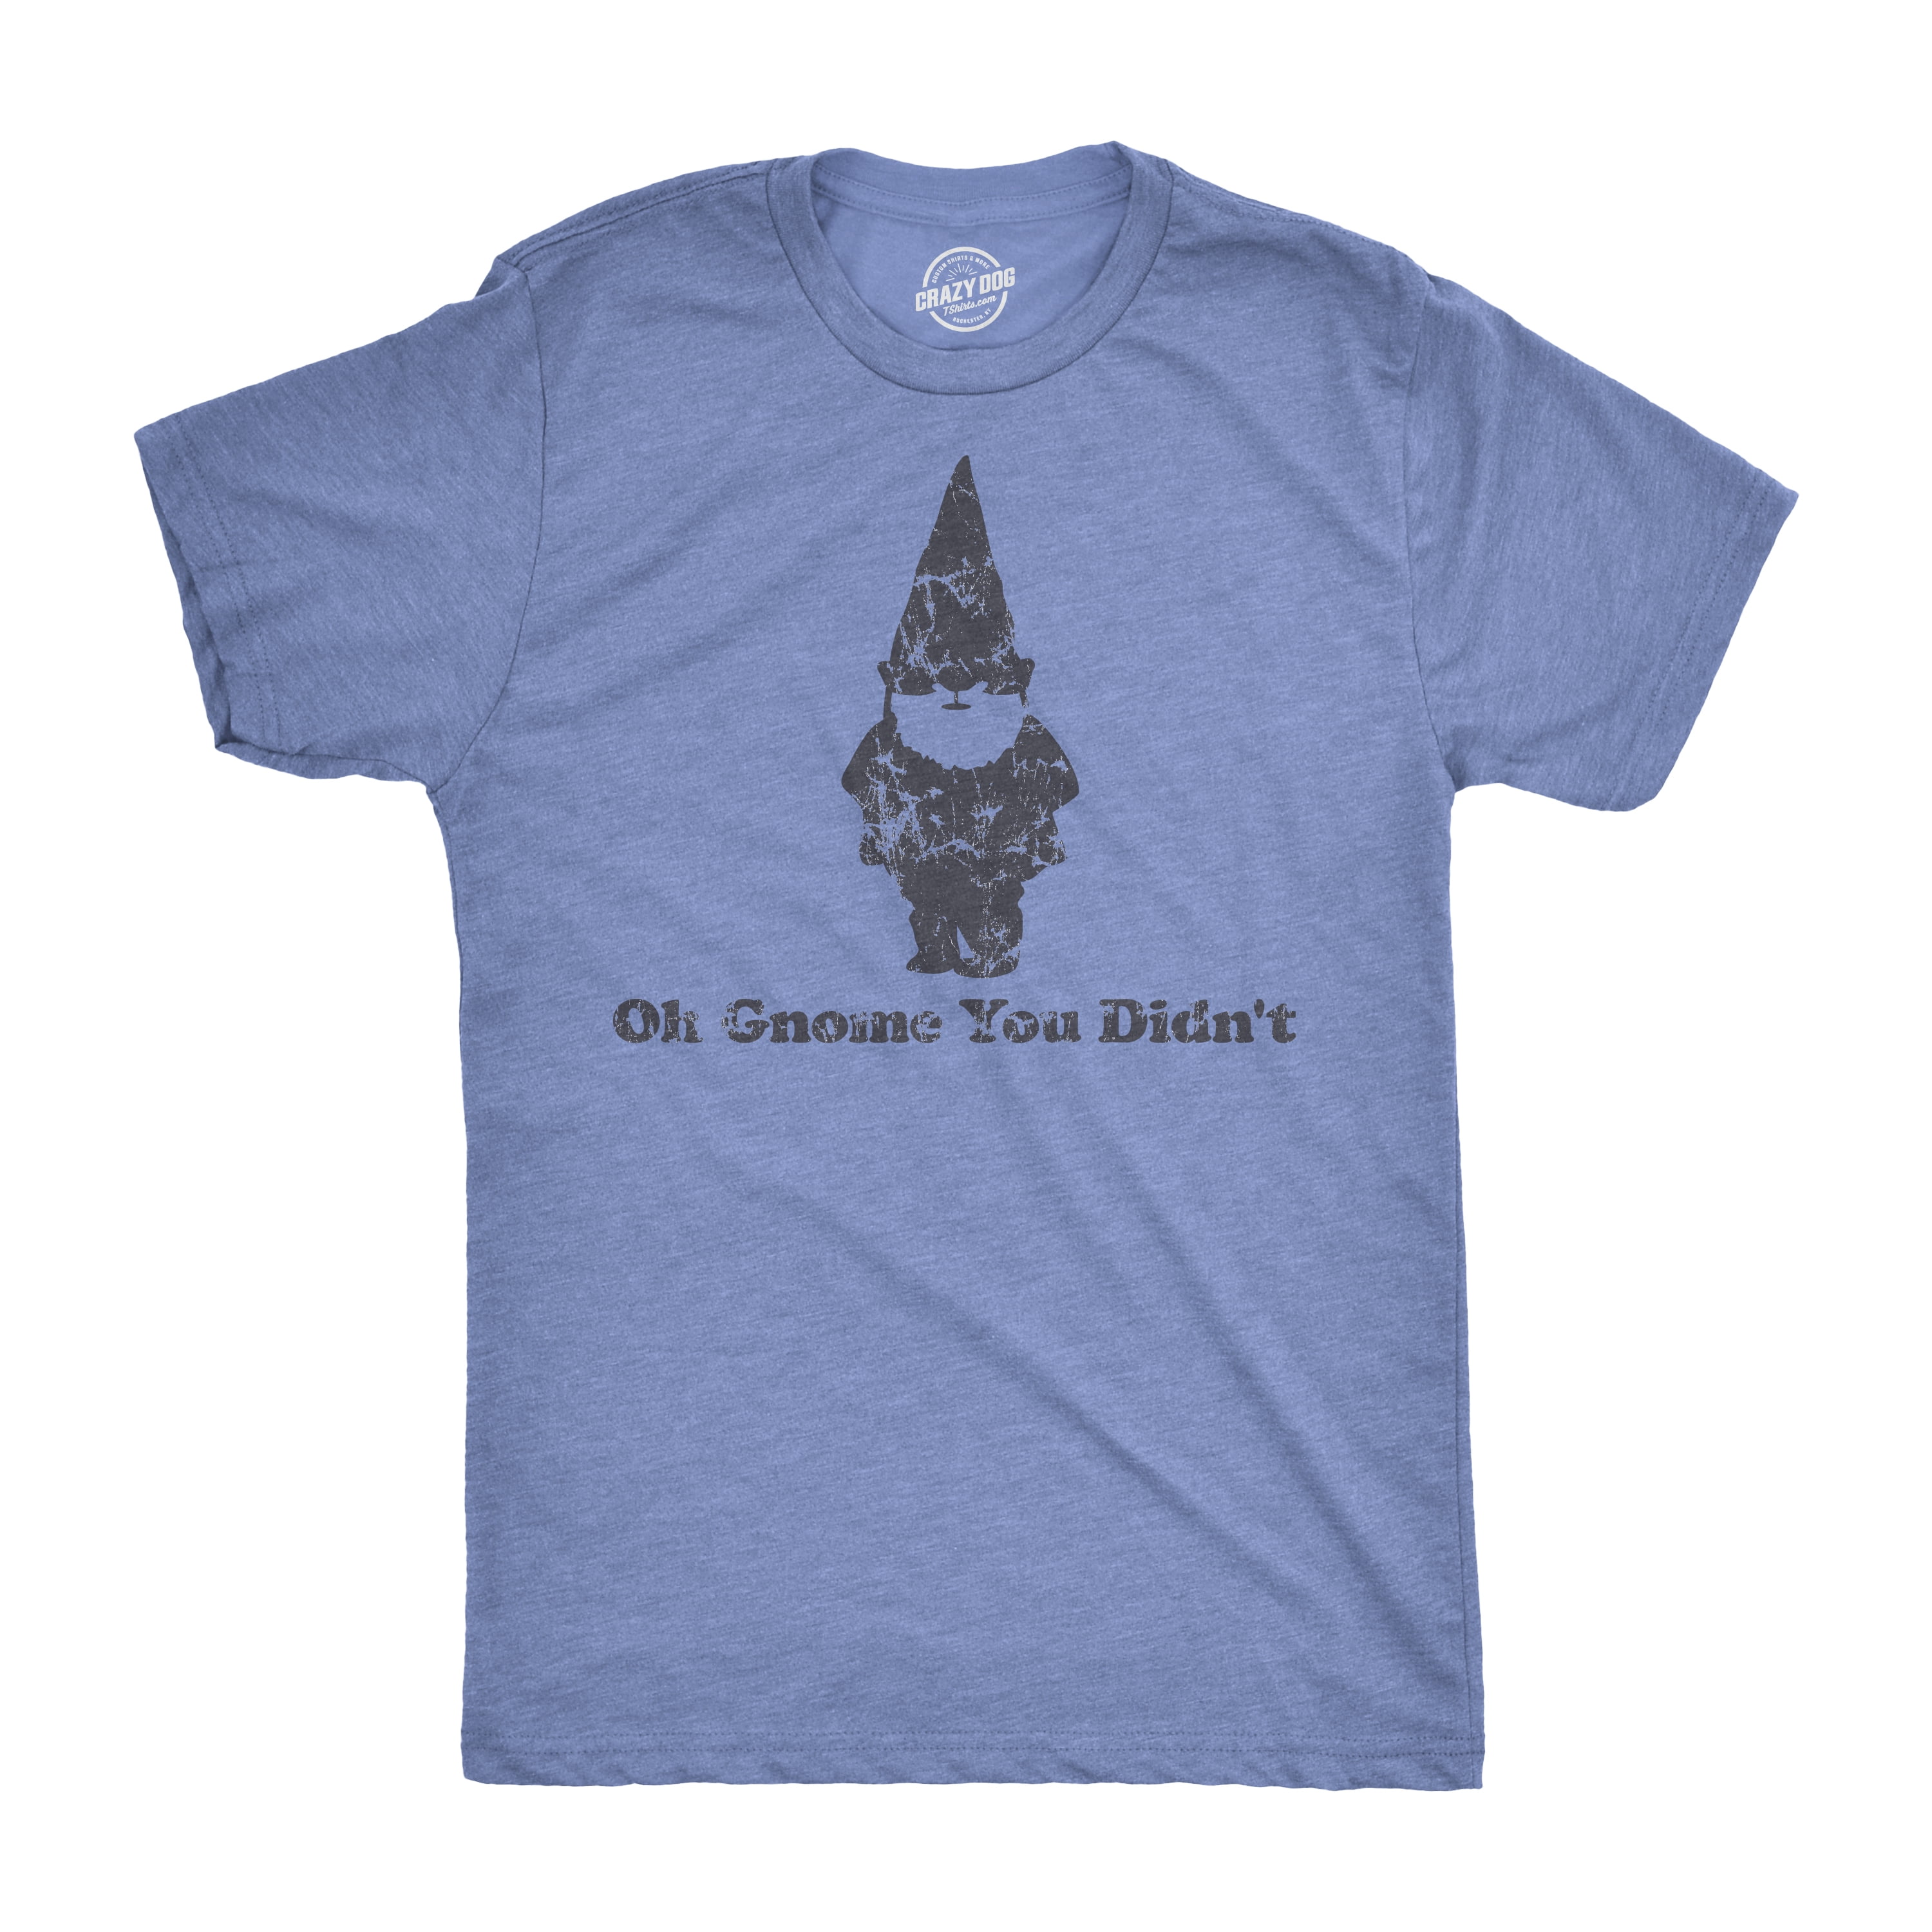 Funny Garden Gnomes Shirt Vintage Music Tees Jammin With My Gnomies T-Shirt